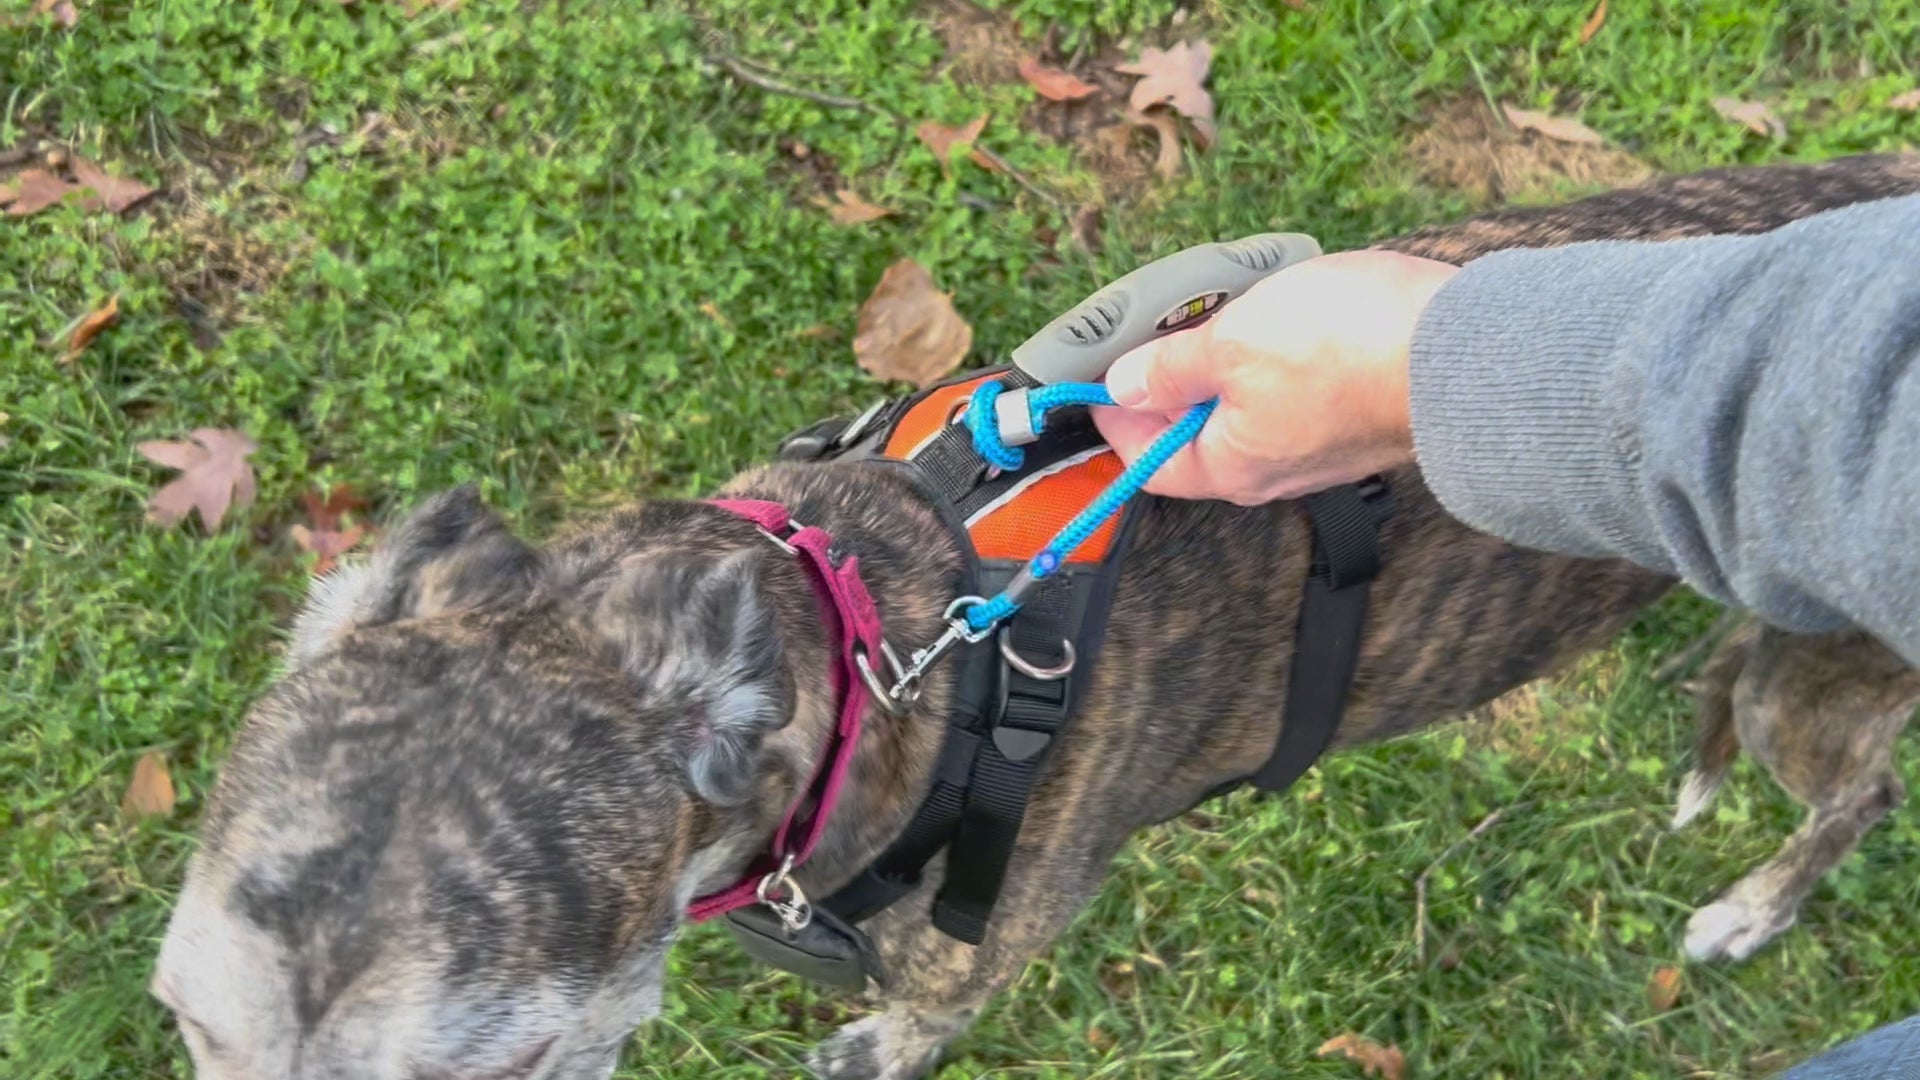 video showing how to attach collar and harness using leash safety strap